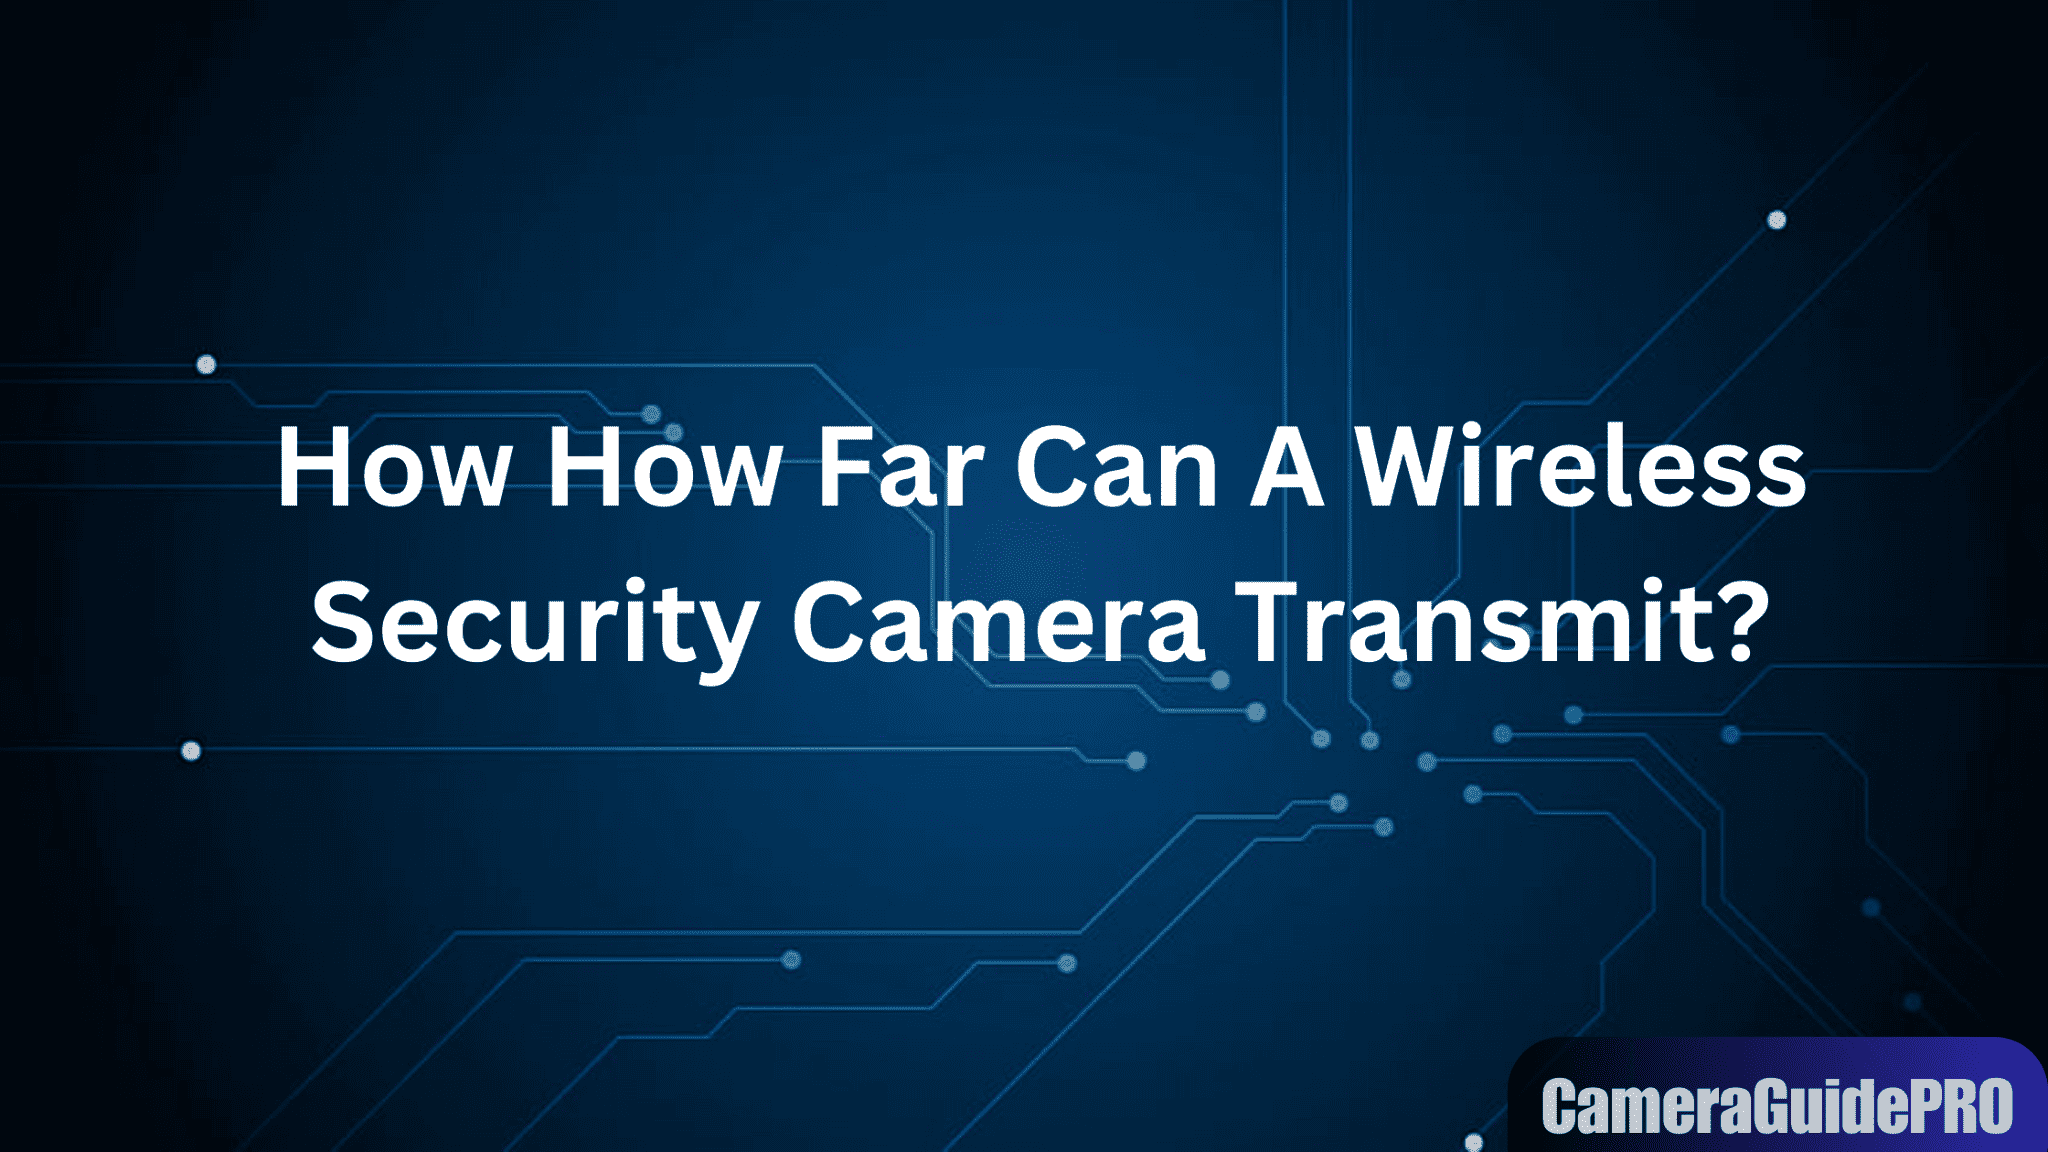 How Far Can A Wireless Security Camera Transmit